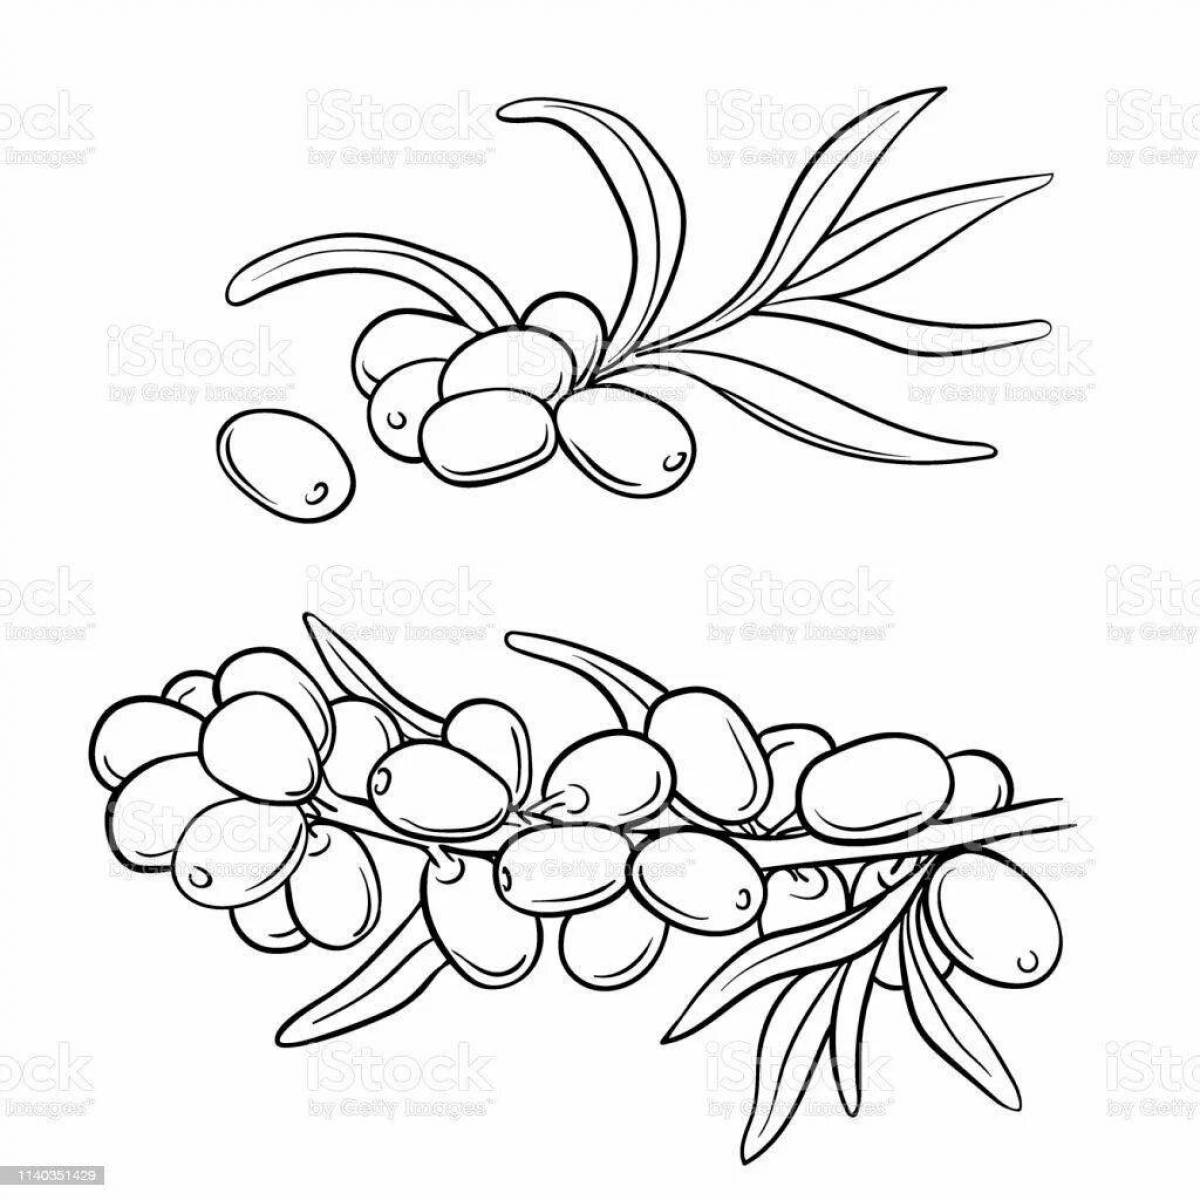 Beautiful sea buckthorn coloring page for kids